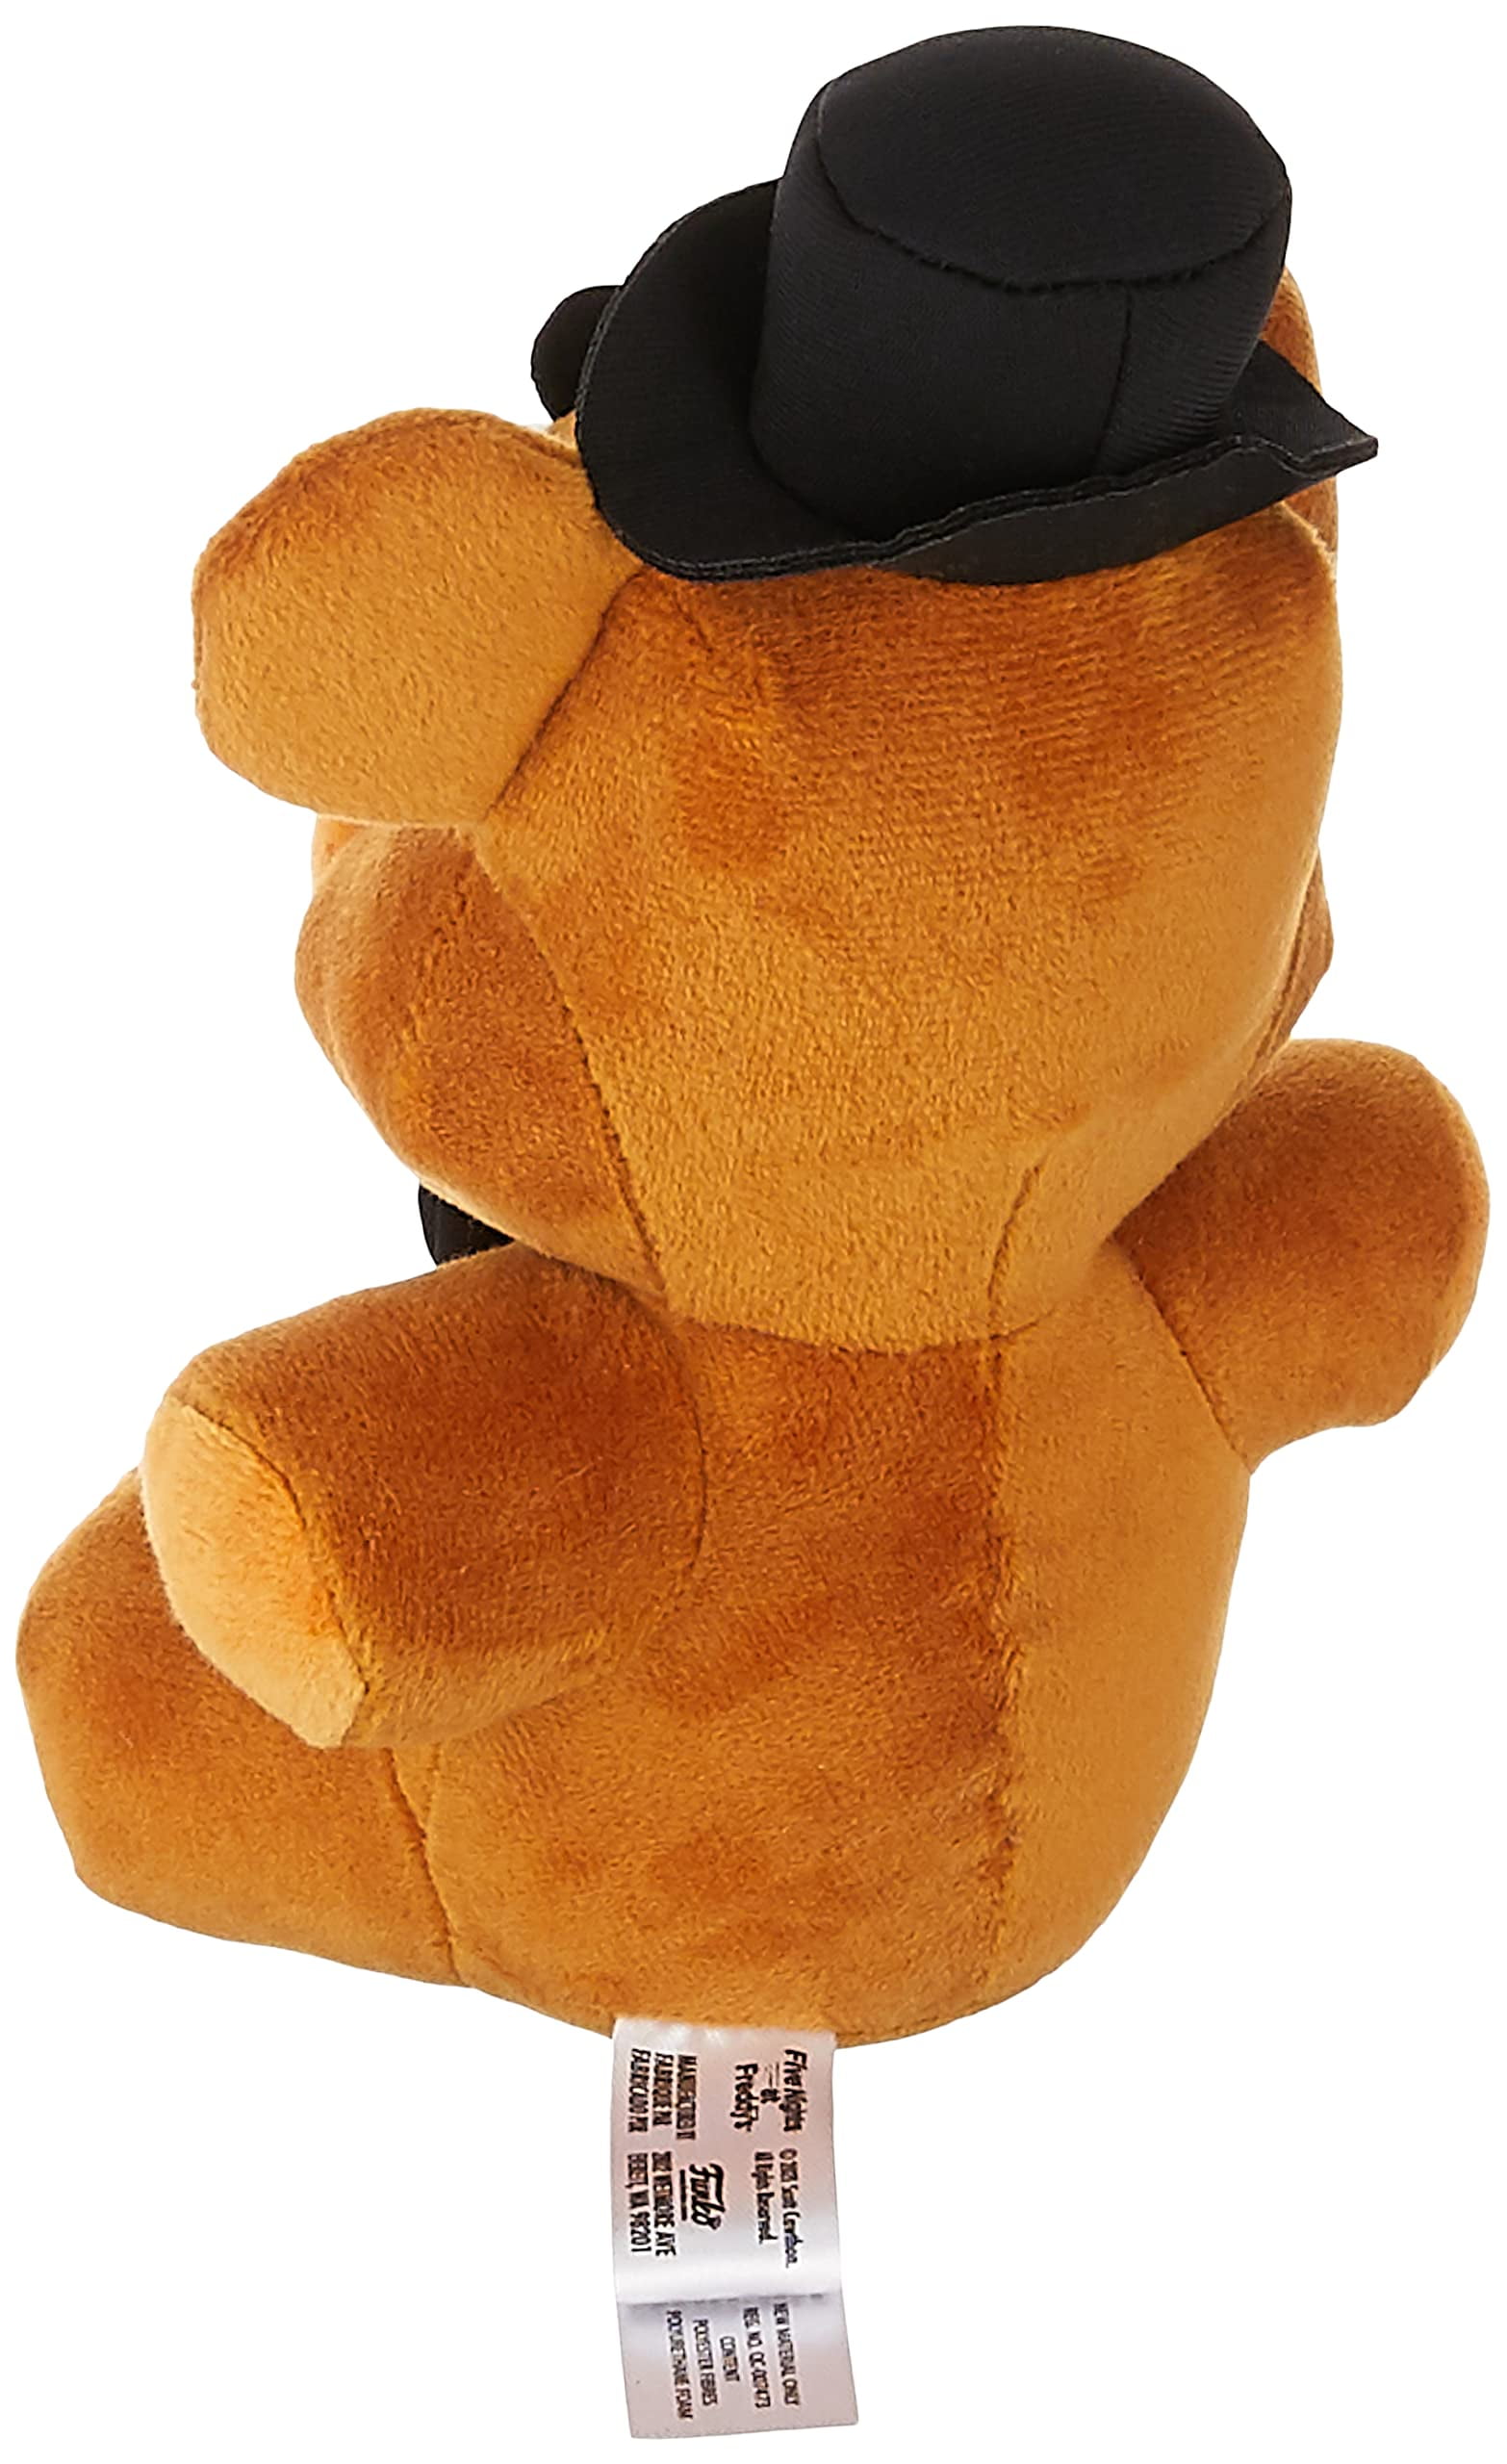 Buy Funko Five Nights At Freddy's Golden Freddy Plush Doll 6 (Walmart)  Exclusive with FNAF Pin Online at desertcartEGYPT